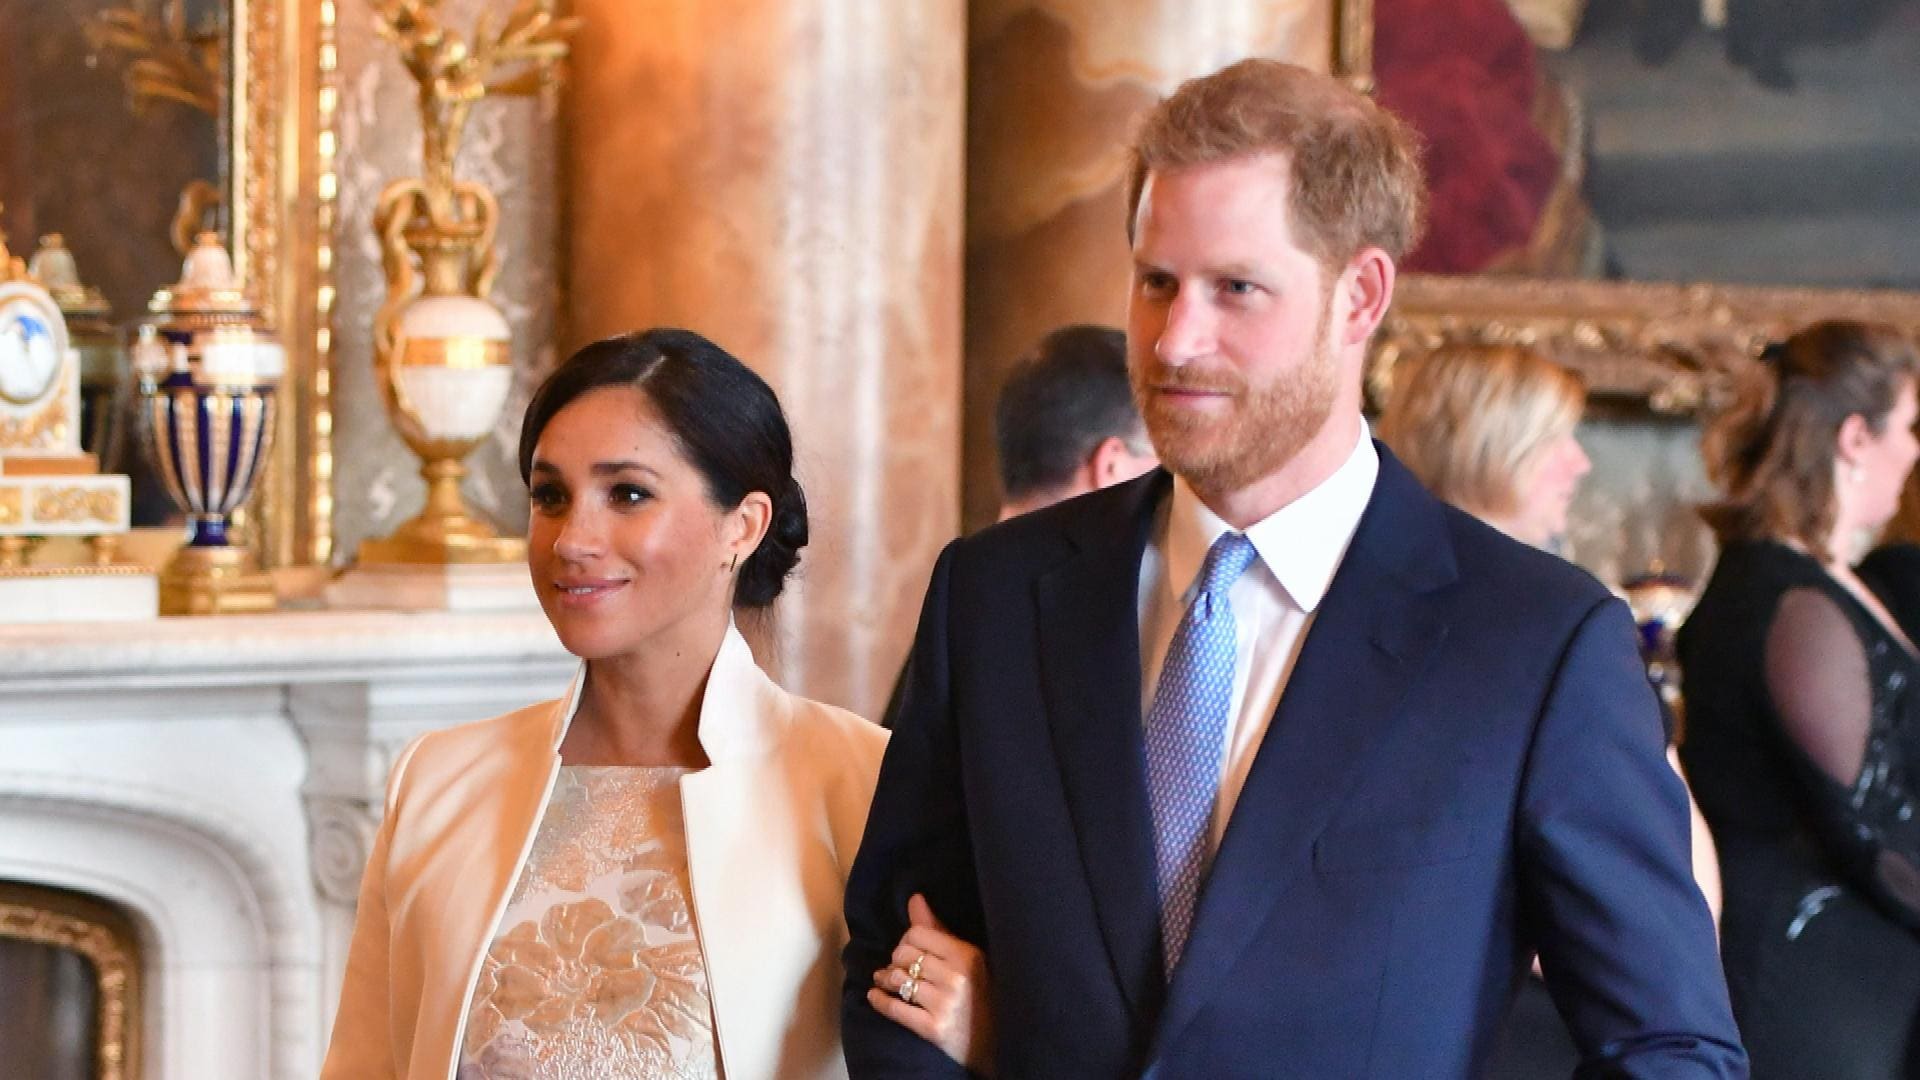 Prince Harry And Meghan Markle To Reportedly Go On Africa Tour With Their Baby ...